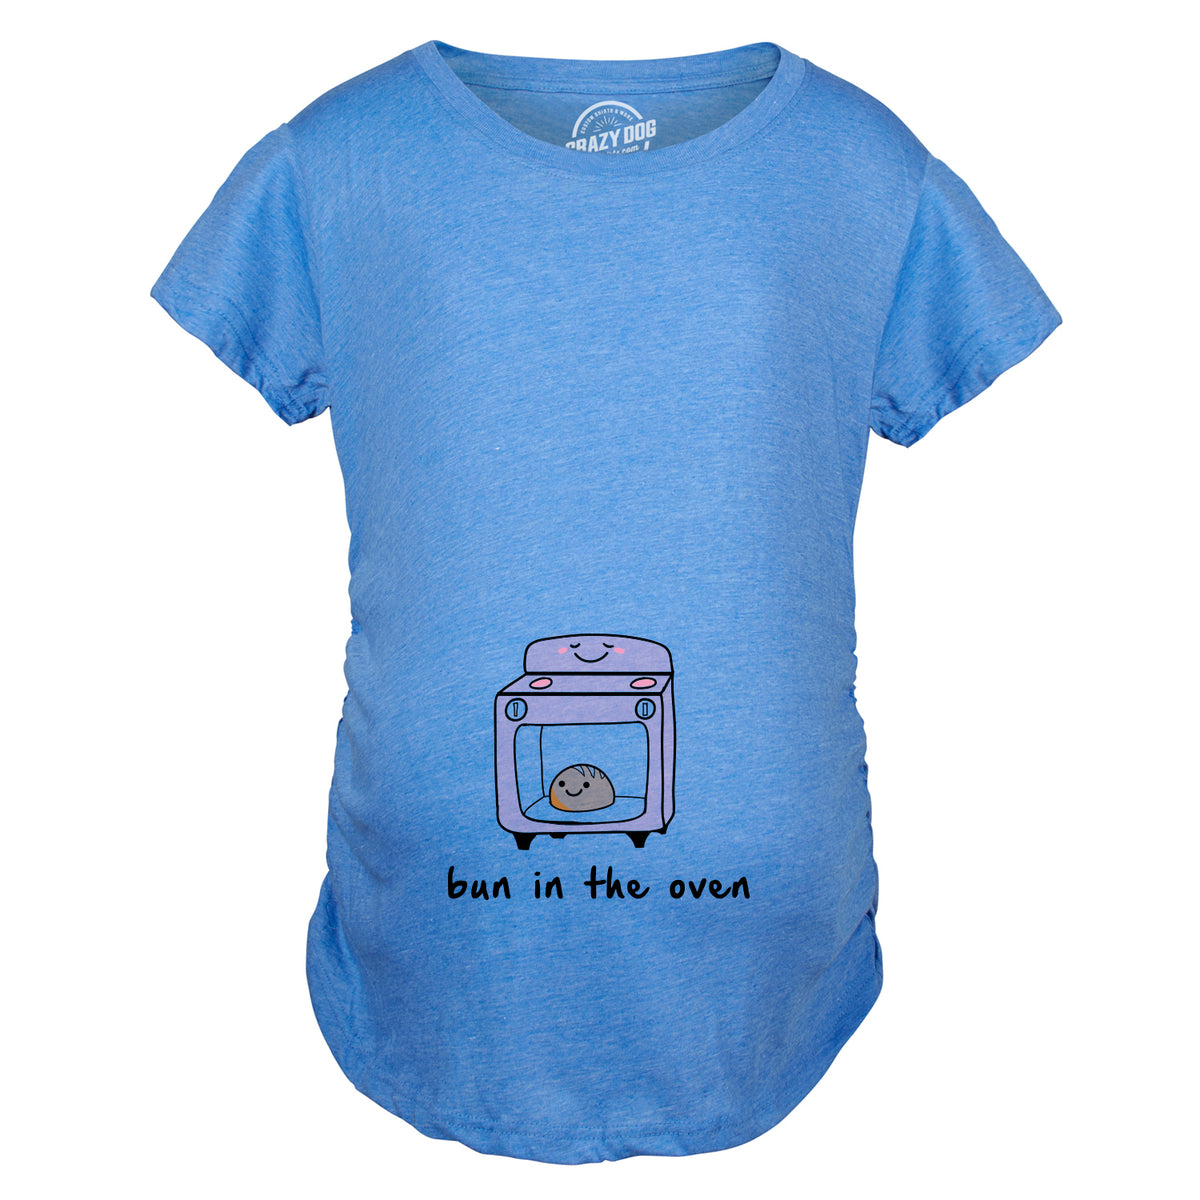 Funny Heather Light Blue Bun In The Oven Maternity T Shirt Nerdy Food Tee